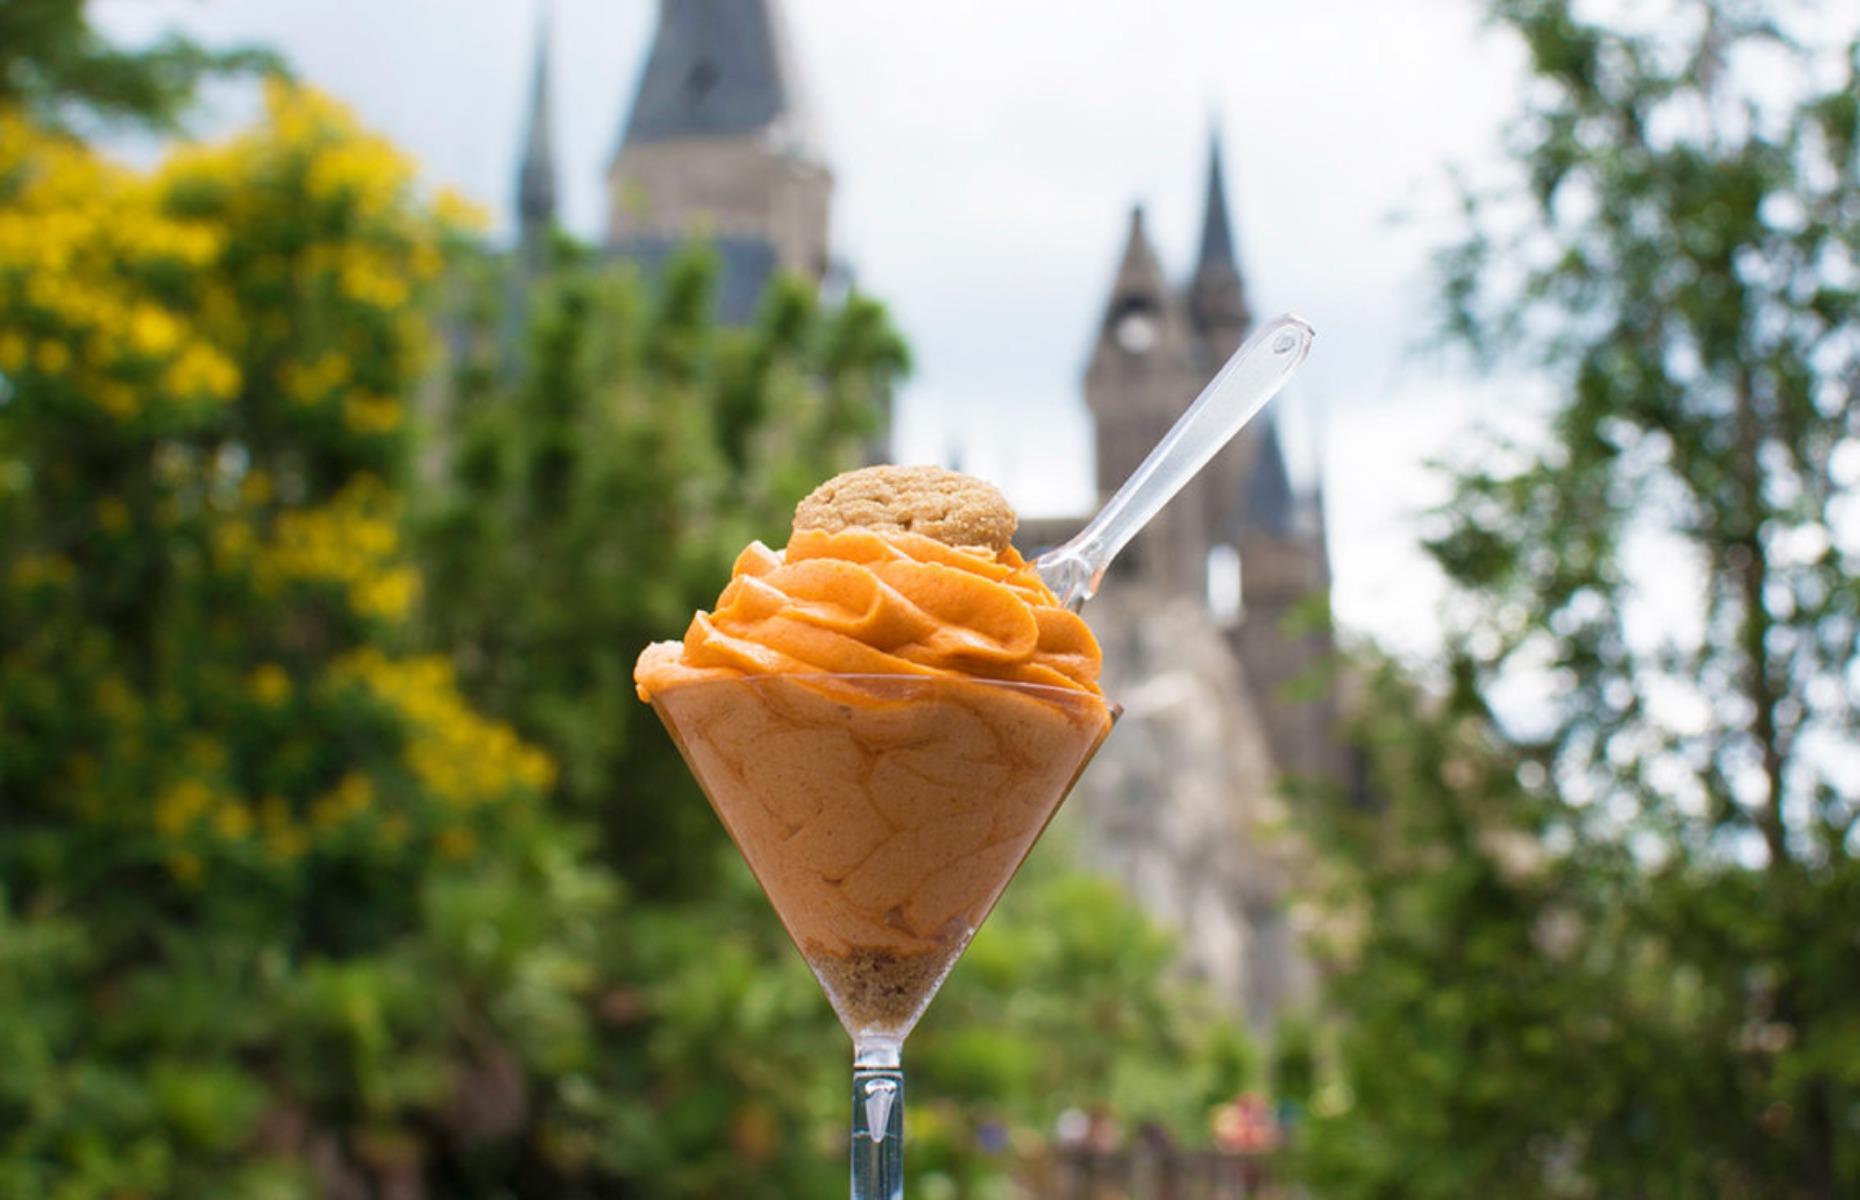 <p>Universal Studios’ pumpkin-flavoured No-Melt ice cream is made from swirls of thick, sunset orange frosting and comes topped with a ginger snap cookie. As the name suggests (and Potterheads will attest), this 'ice cream' won't melt, making it just the thing to enjoy in the sunshine while strolling through Diagon Alley. You can find it at Honeydukes, the legendary candy shop in Hogsmeade at Universal Studios. </p>